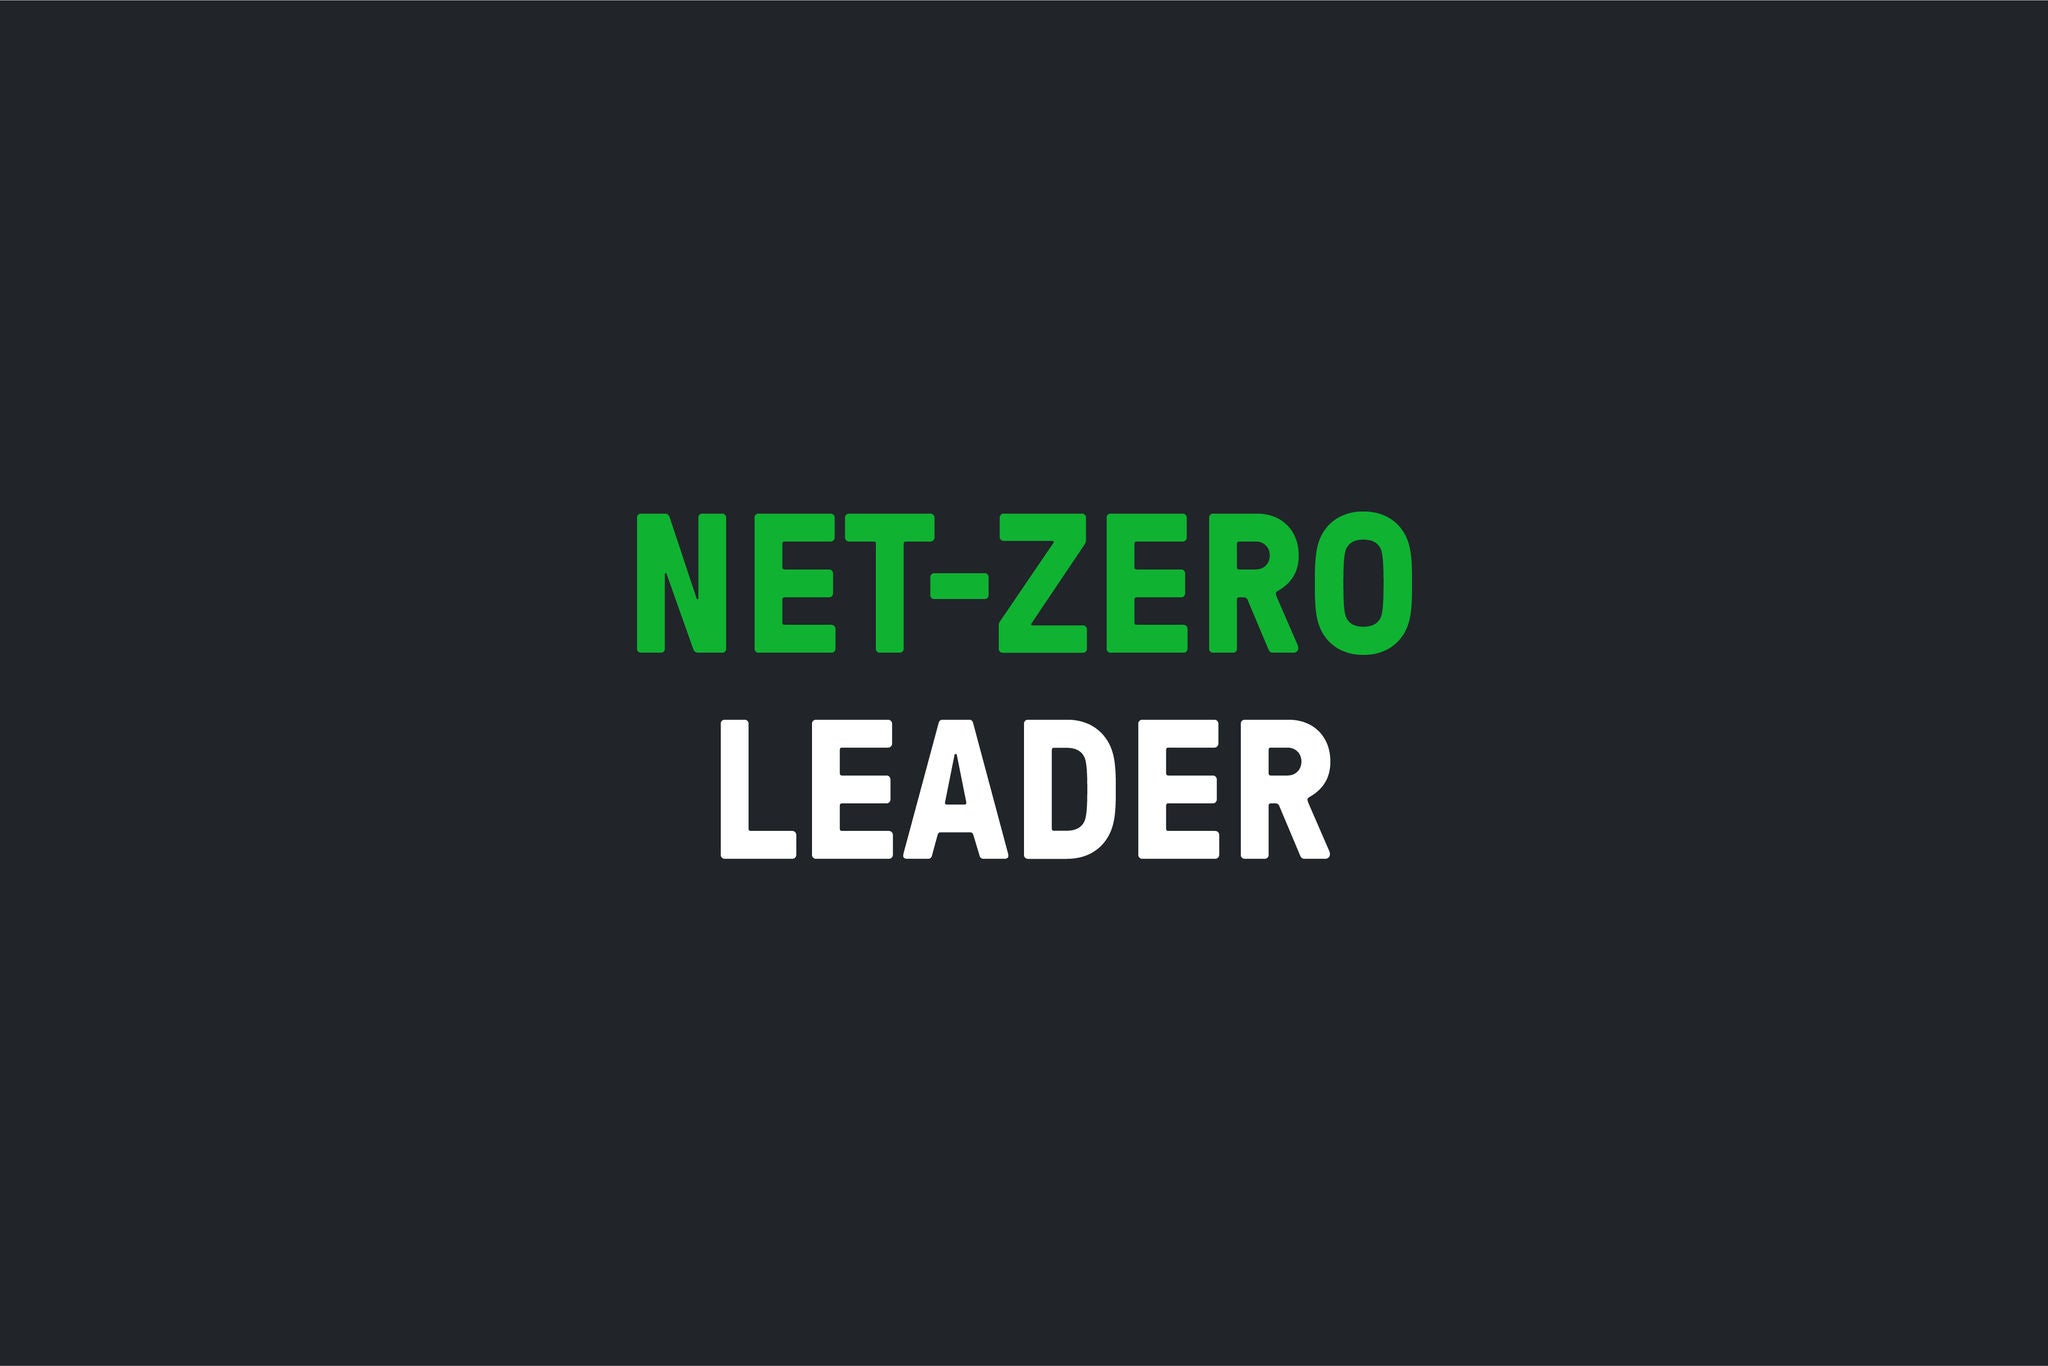 Net zero in green and leader in white on a black square showing the net zero leader recognition representing sustainable rail transport work 